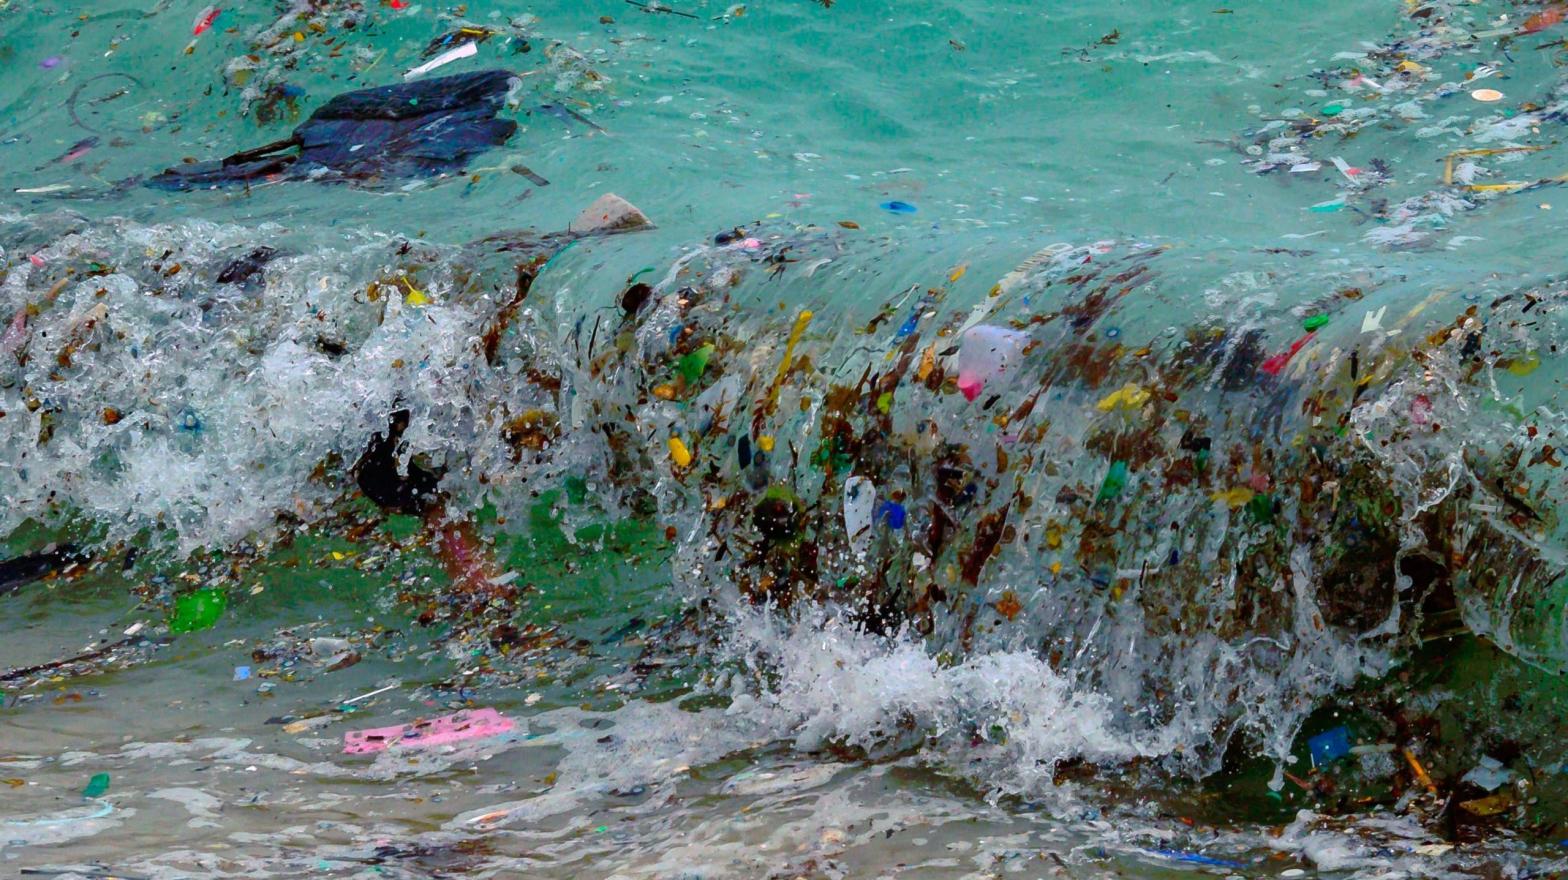 A wave carrying plastic waste and other rubbish washes up on a beach in Koh Samui in the Gulf of Thailand. (Photo: Mladen Antonov/AFP, Getty Images)